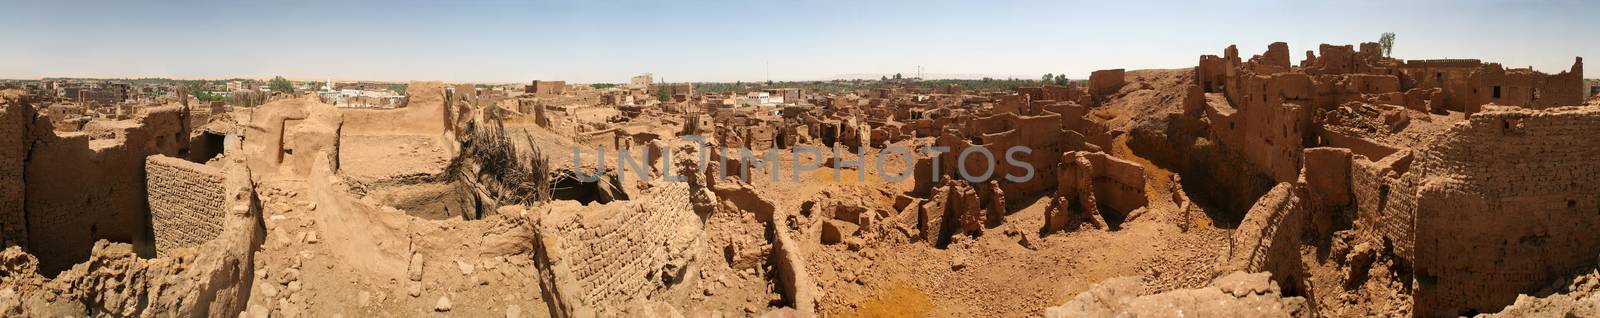 Old part of the biggest city in Dakhla Oazis ( Egypt) - Mut with it't mud houses where people still live